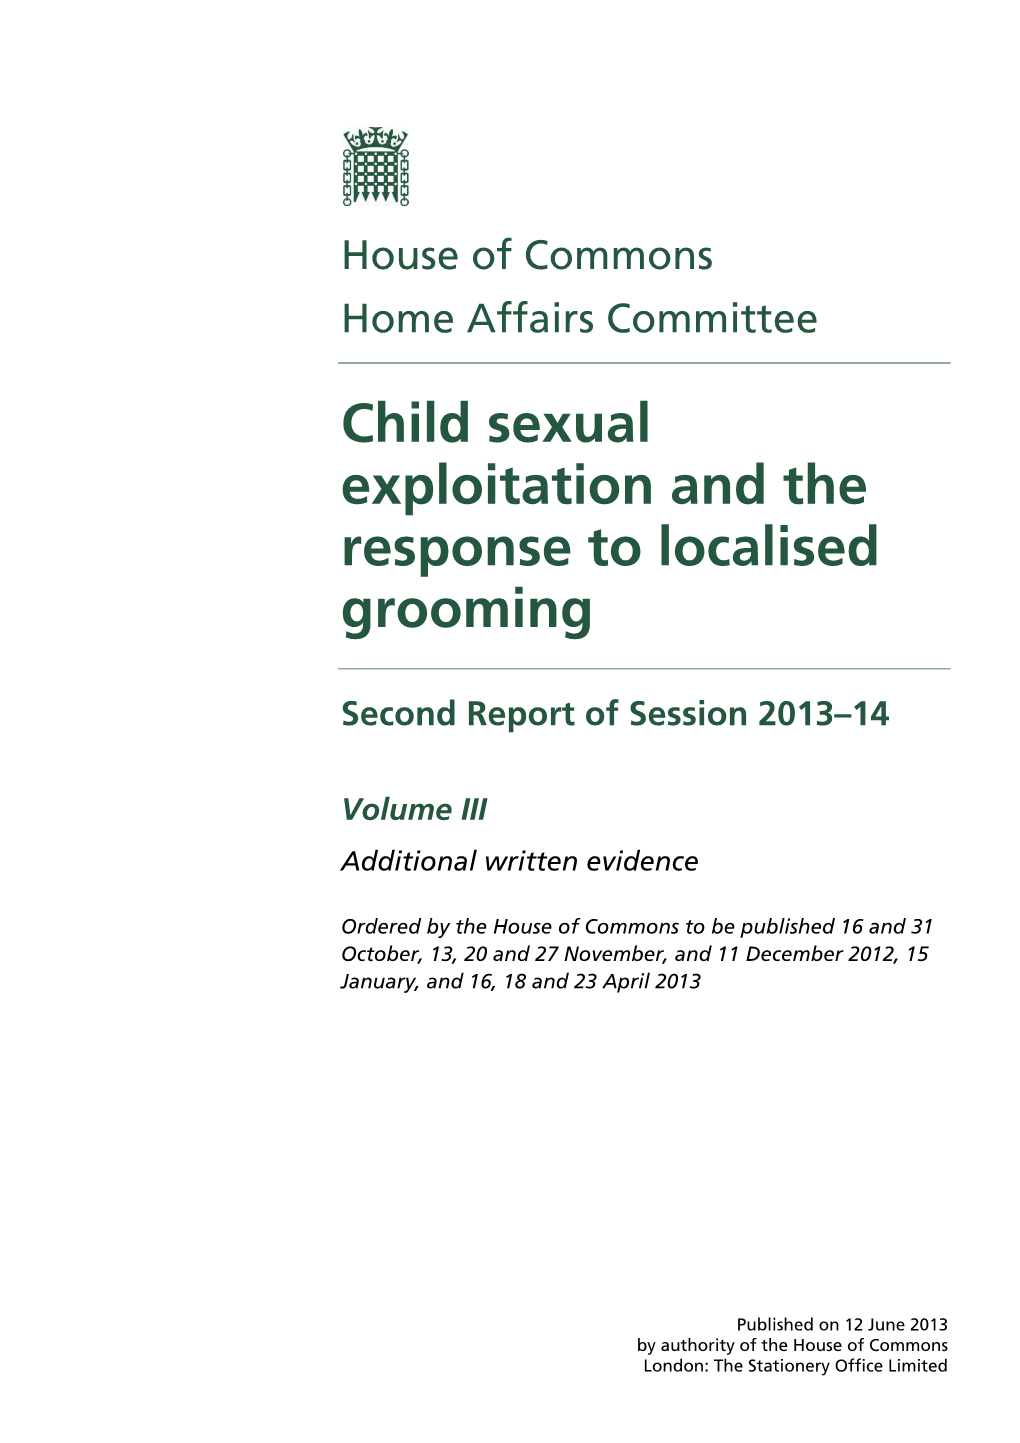 Child Sexual Exploitation and the Response to Localised Grooming